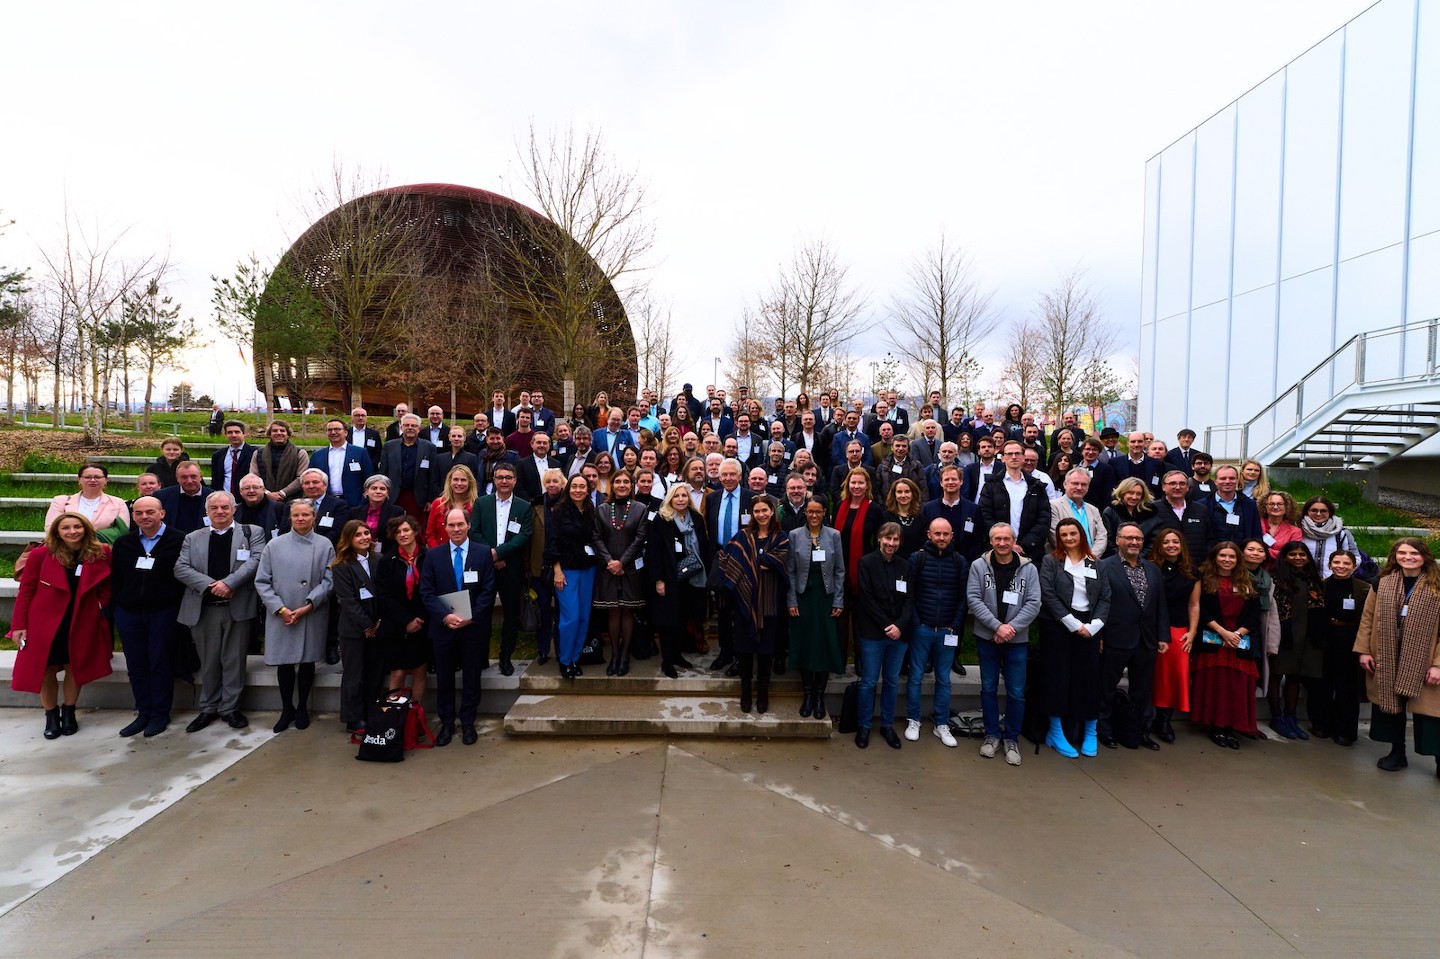 GESDA: The Open Quantum Institute launches its pilot phase at CERN